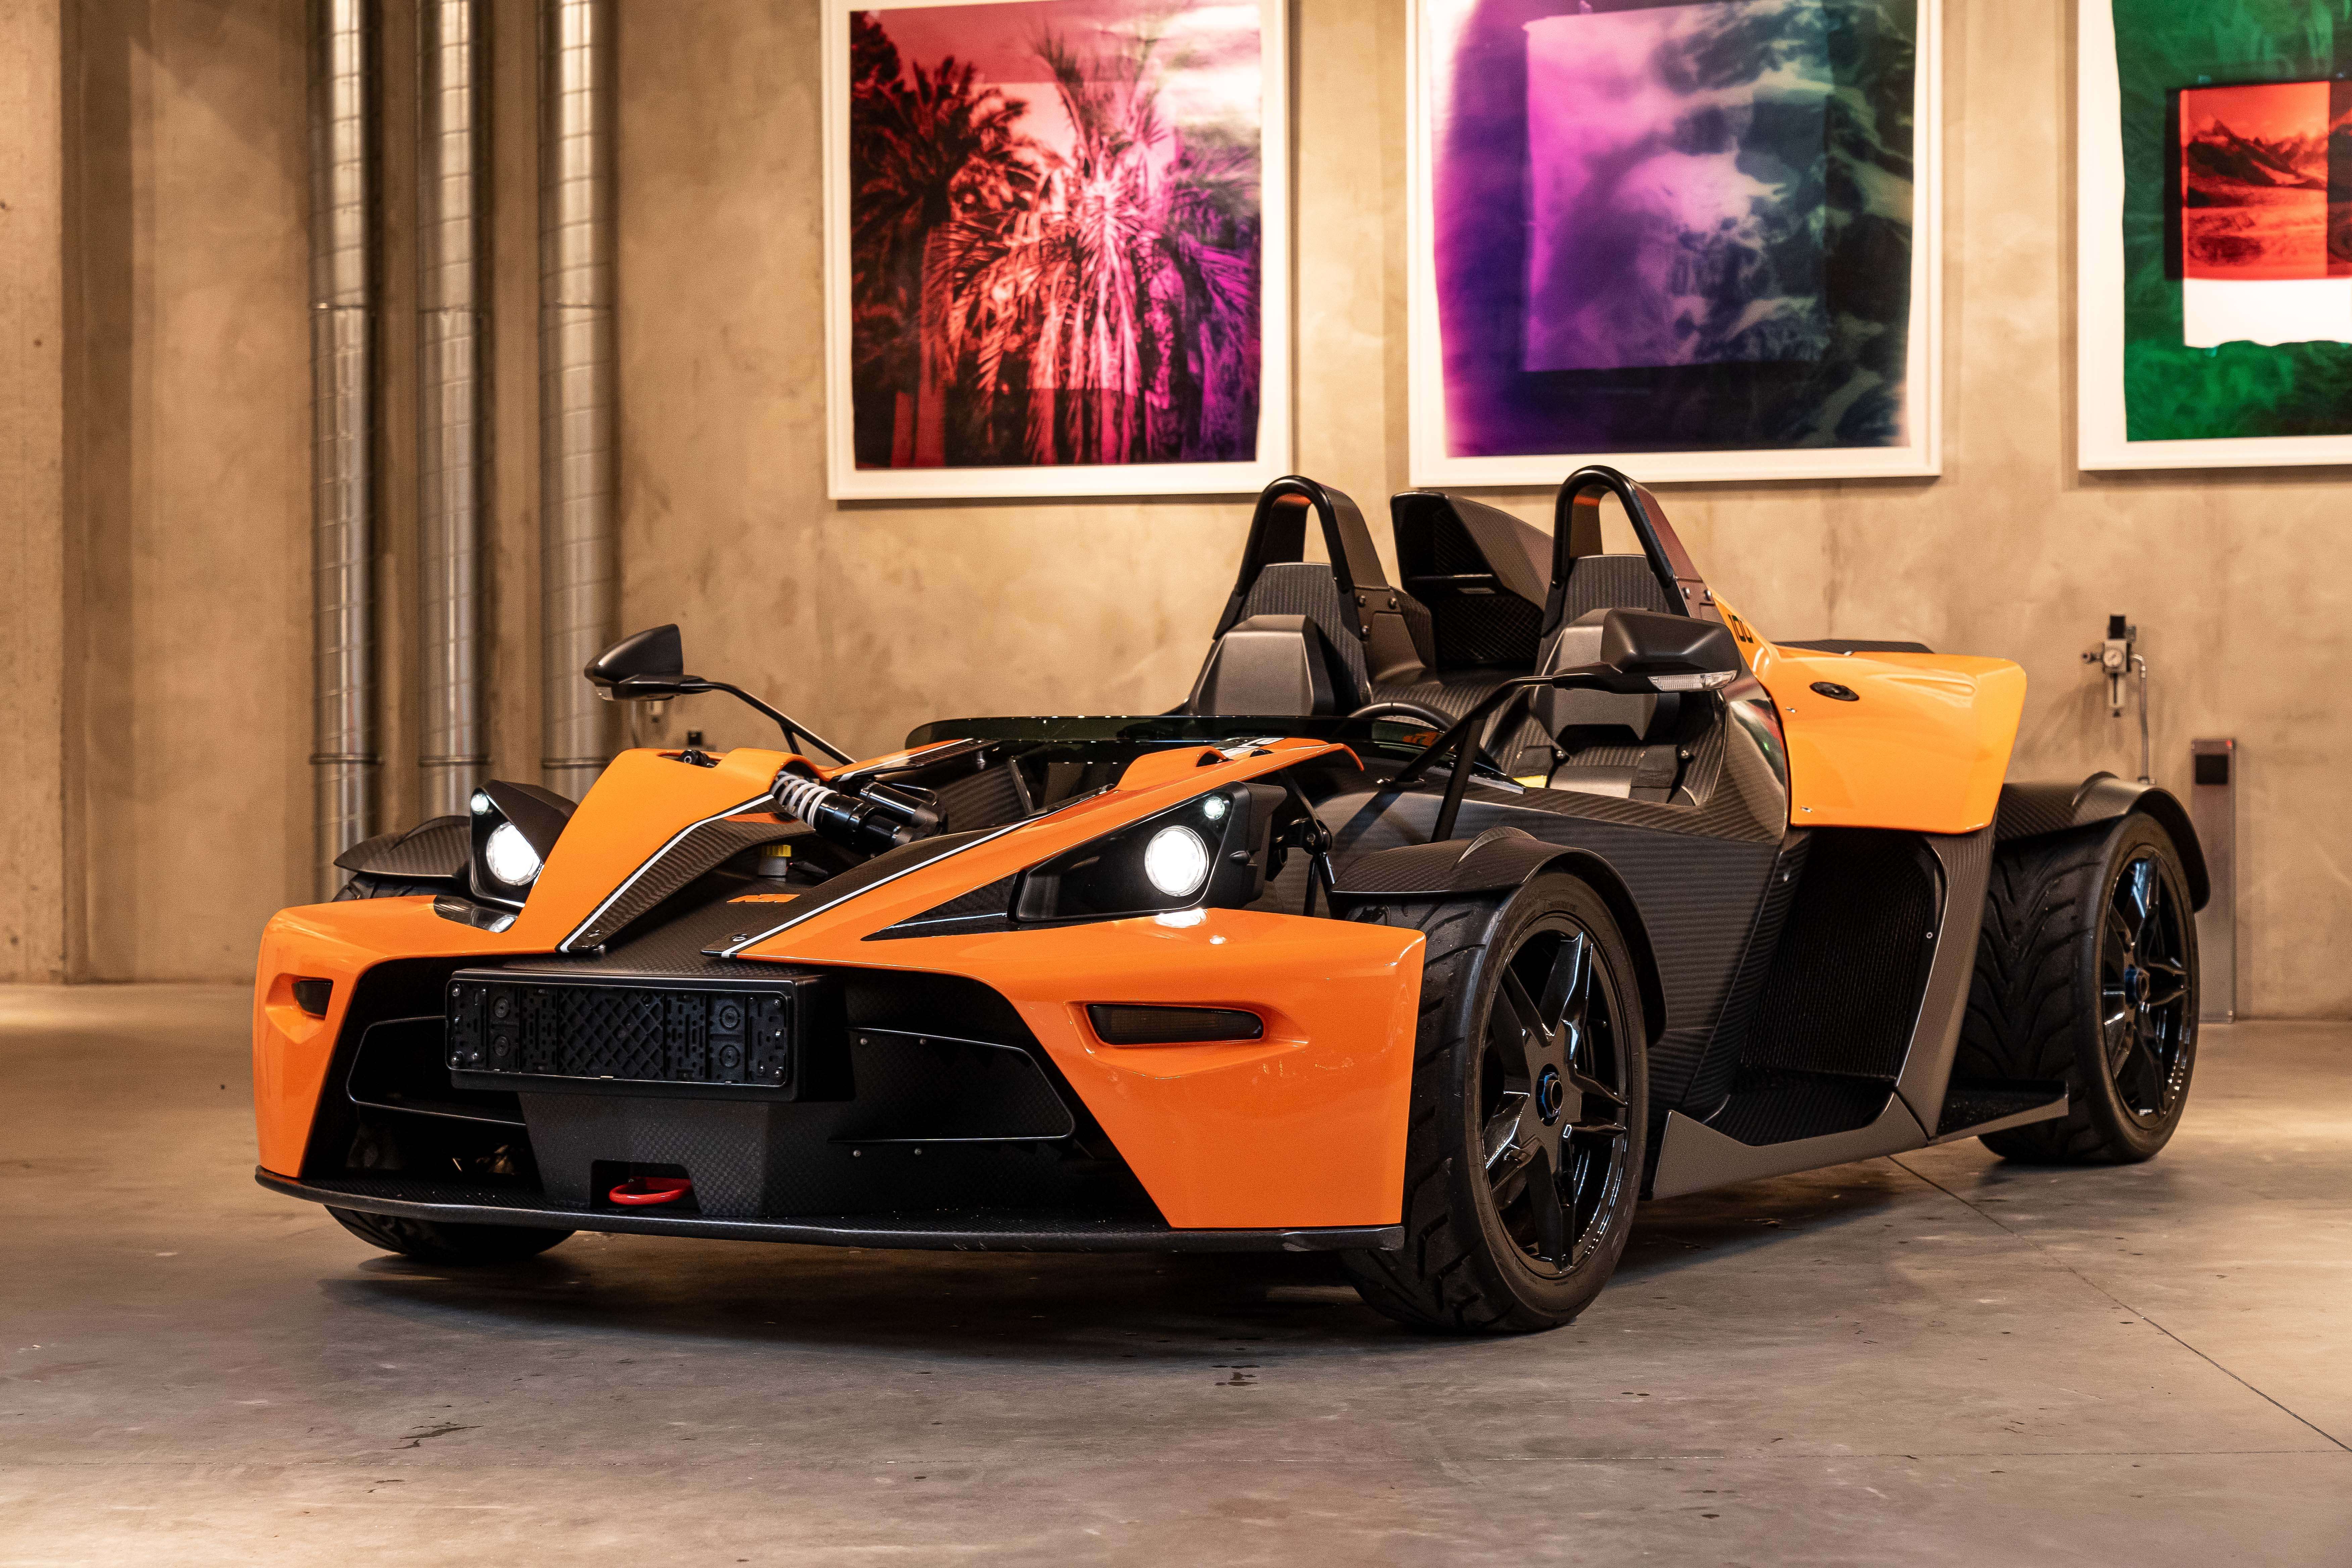 KTM X-Bow Street Convertible in Orange used in Uccle for € 74,950.-